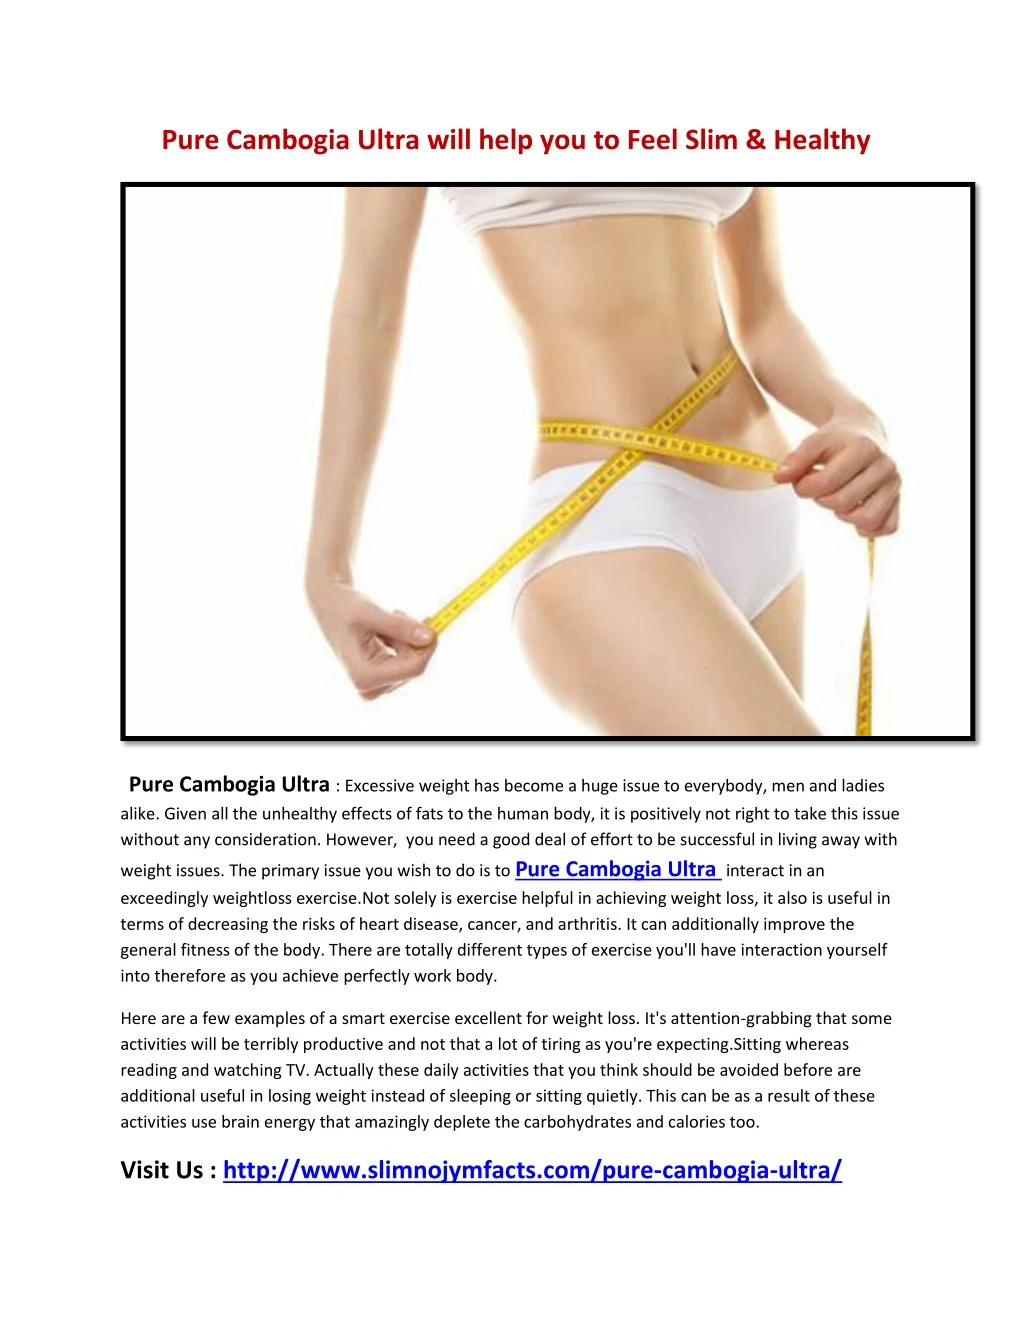 pure cambogia ultra will help you to feel slim